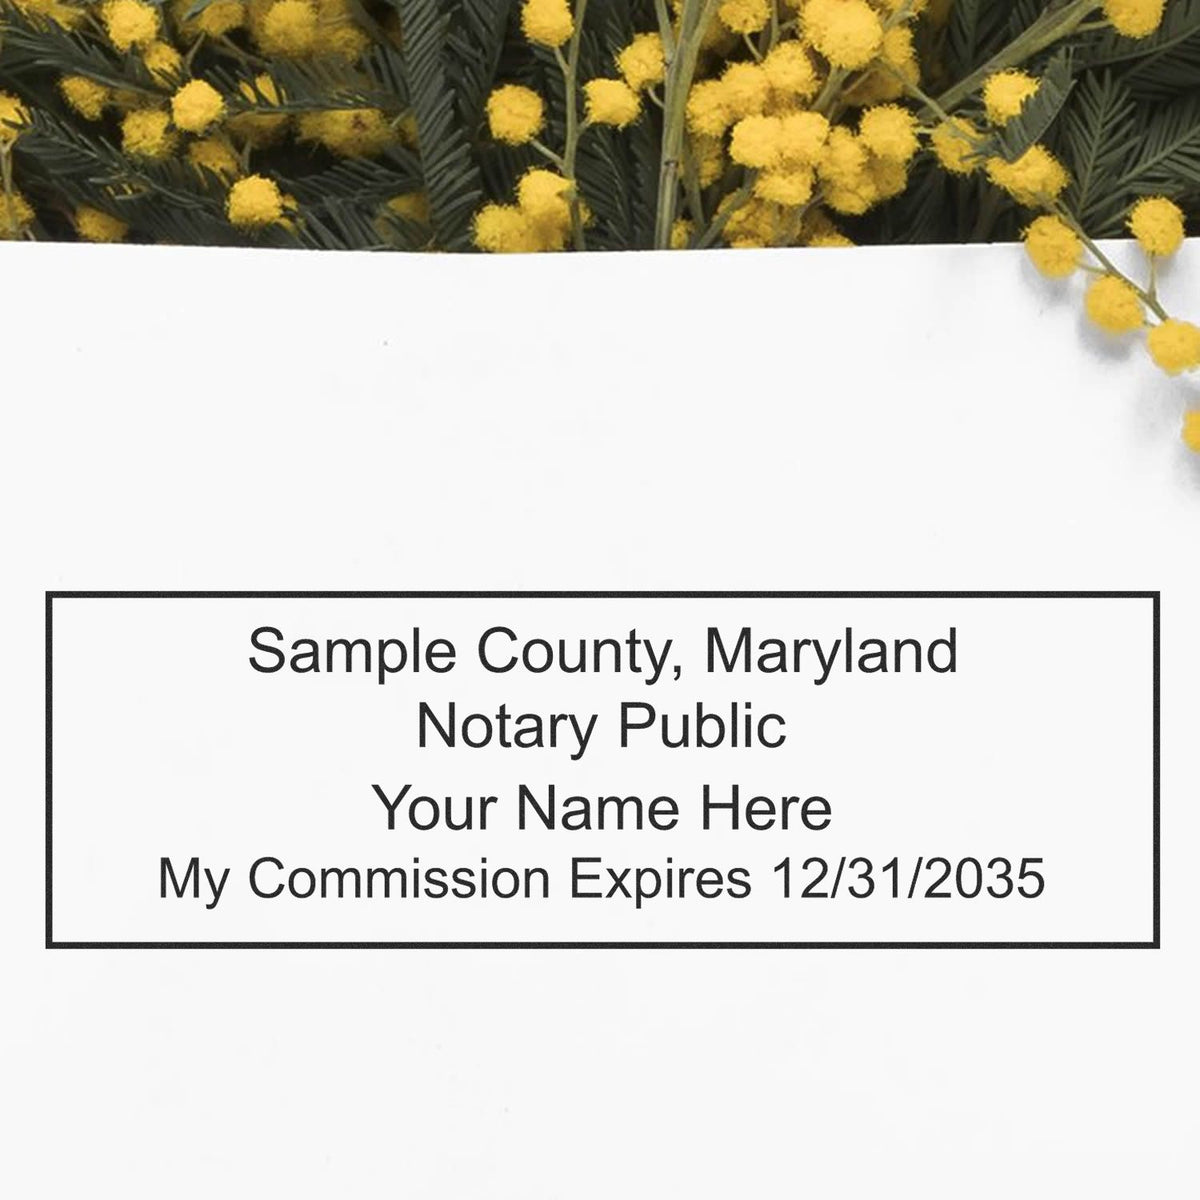 A lifestyle photo showing a stamped image of the Heavy-Duty Maryland Rectangular Notary Stamp on a piece of paper